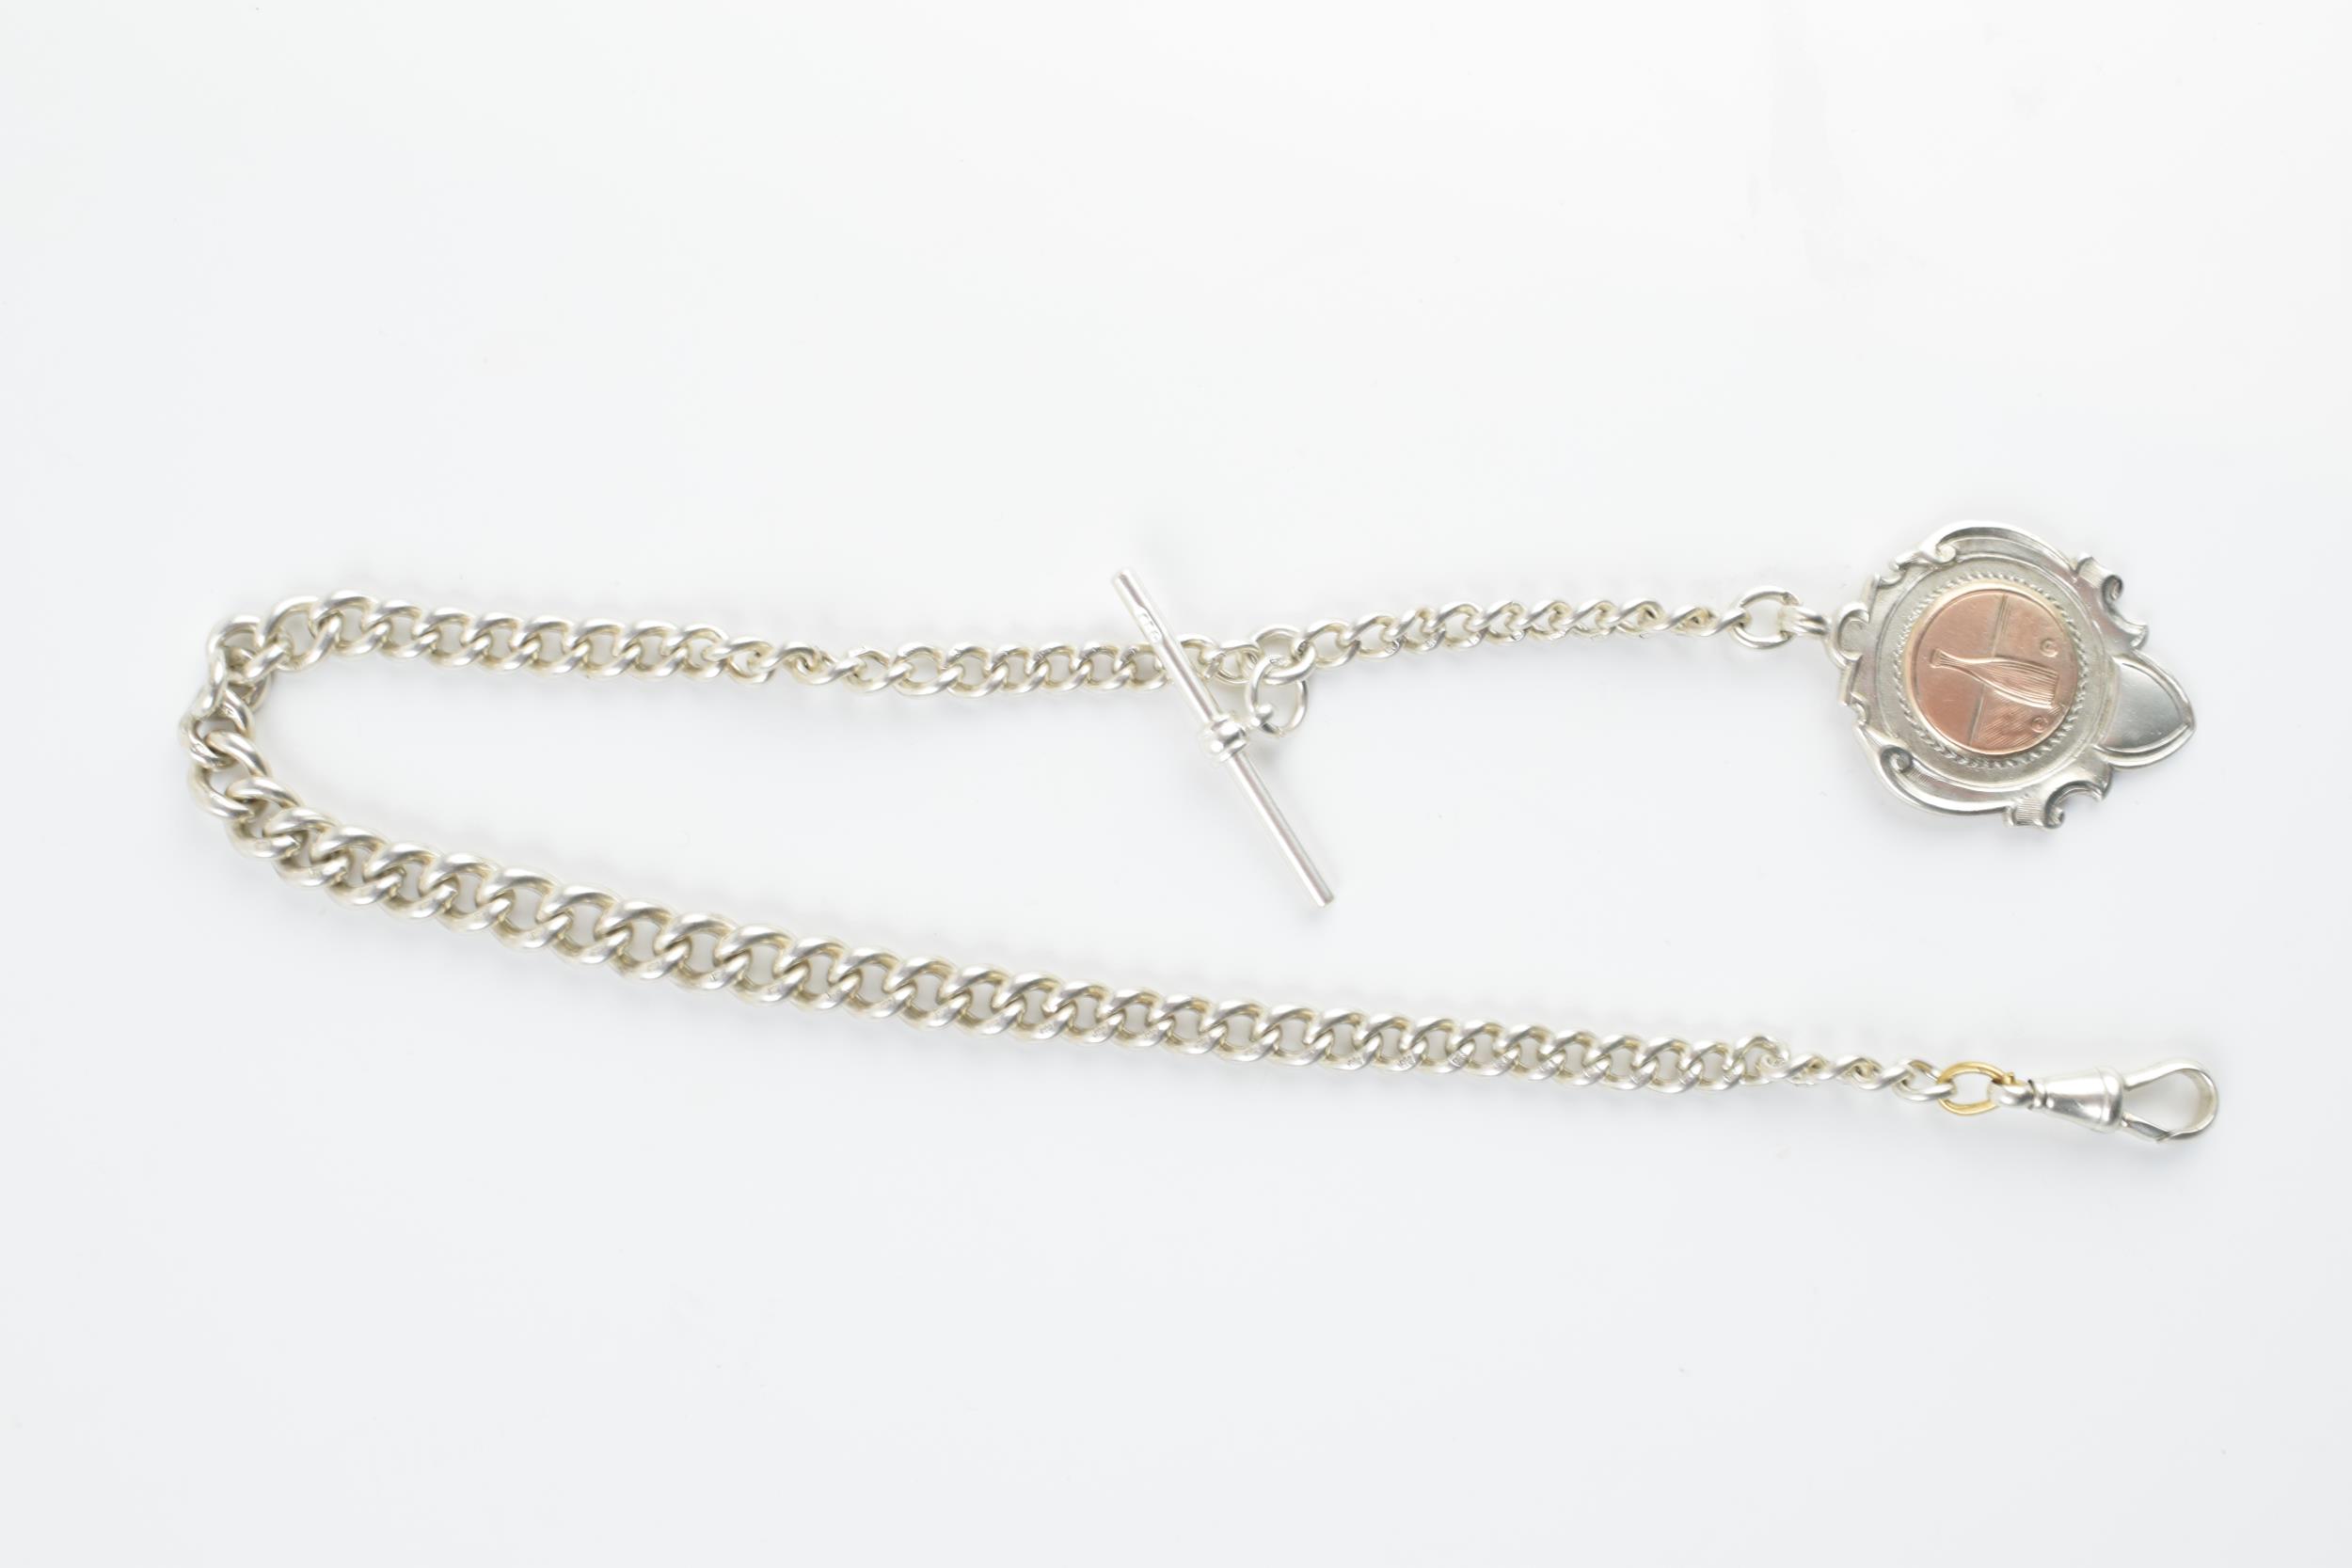 Hallmarked silver Albert pocket watch chain with T-bar and fob, 50.8 grams, 39cm long.